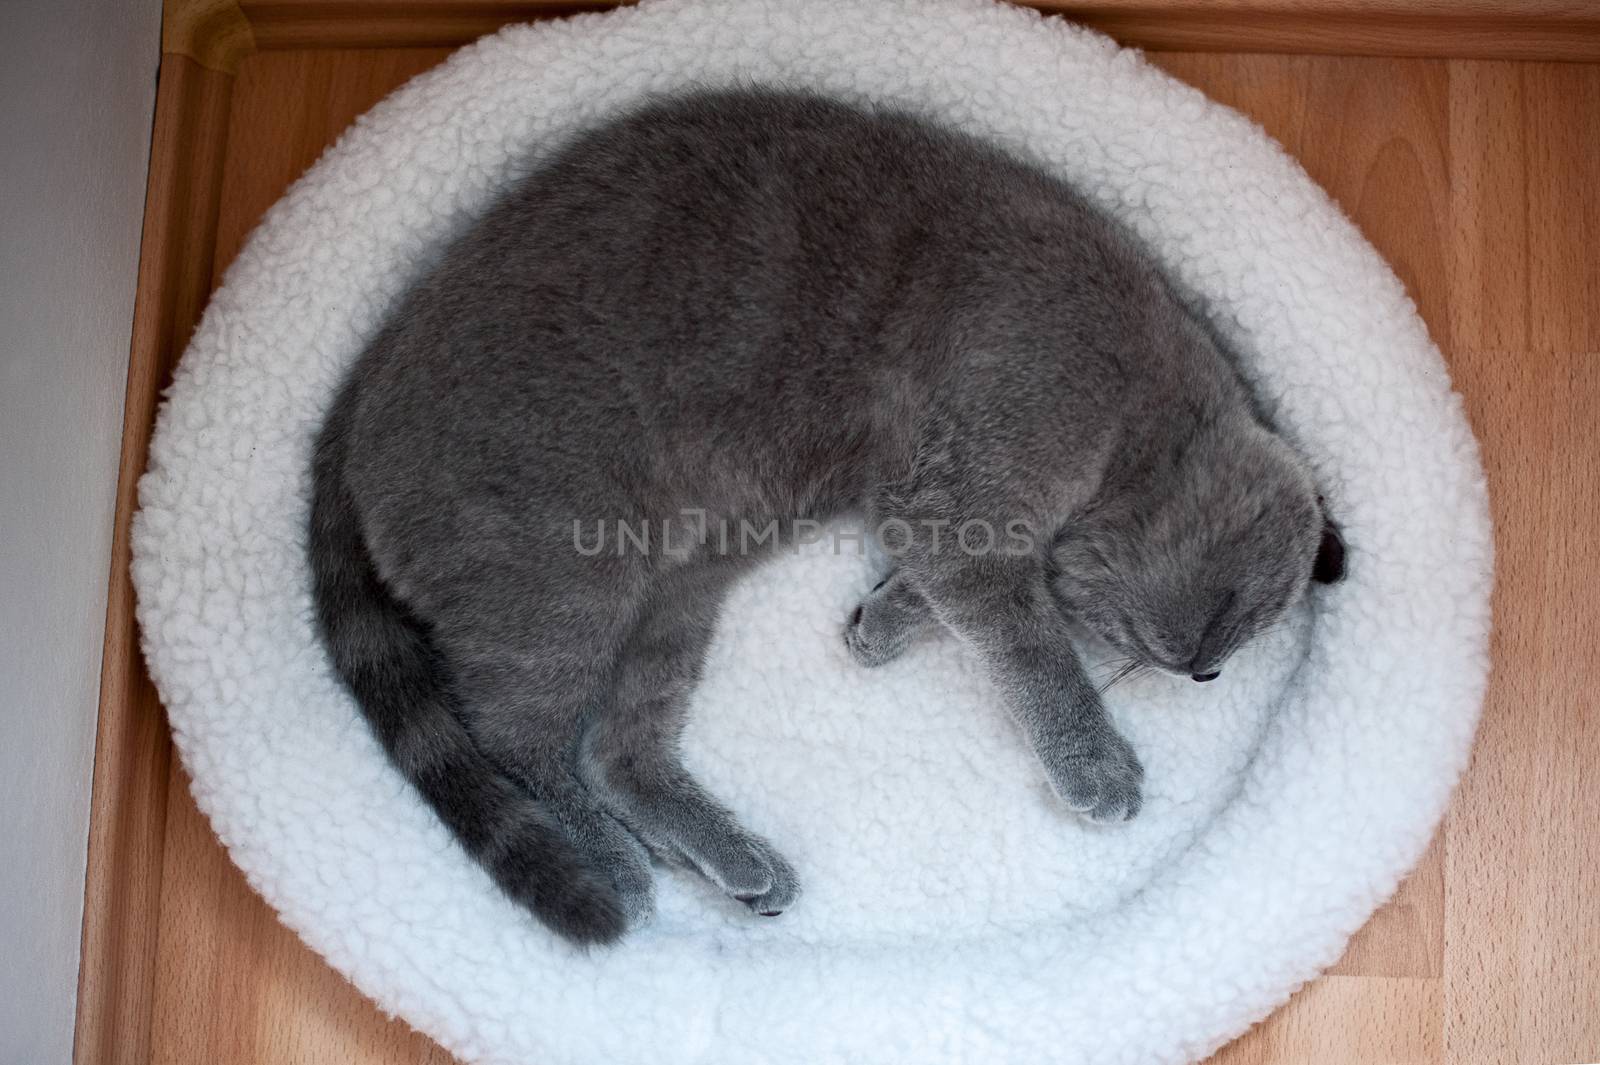 British short-hair cat sleeps in his soft white cozy bed on a floor, soft focus

